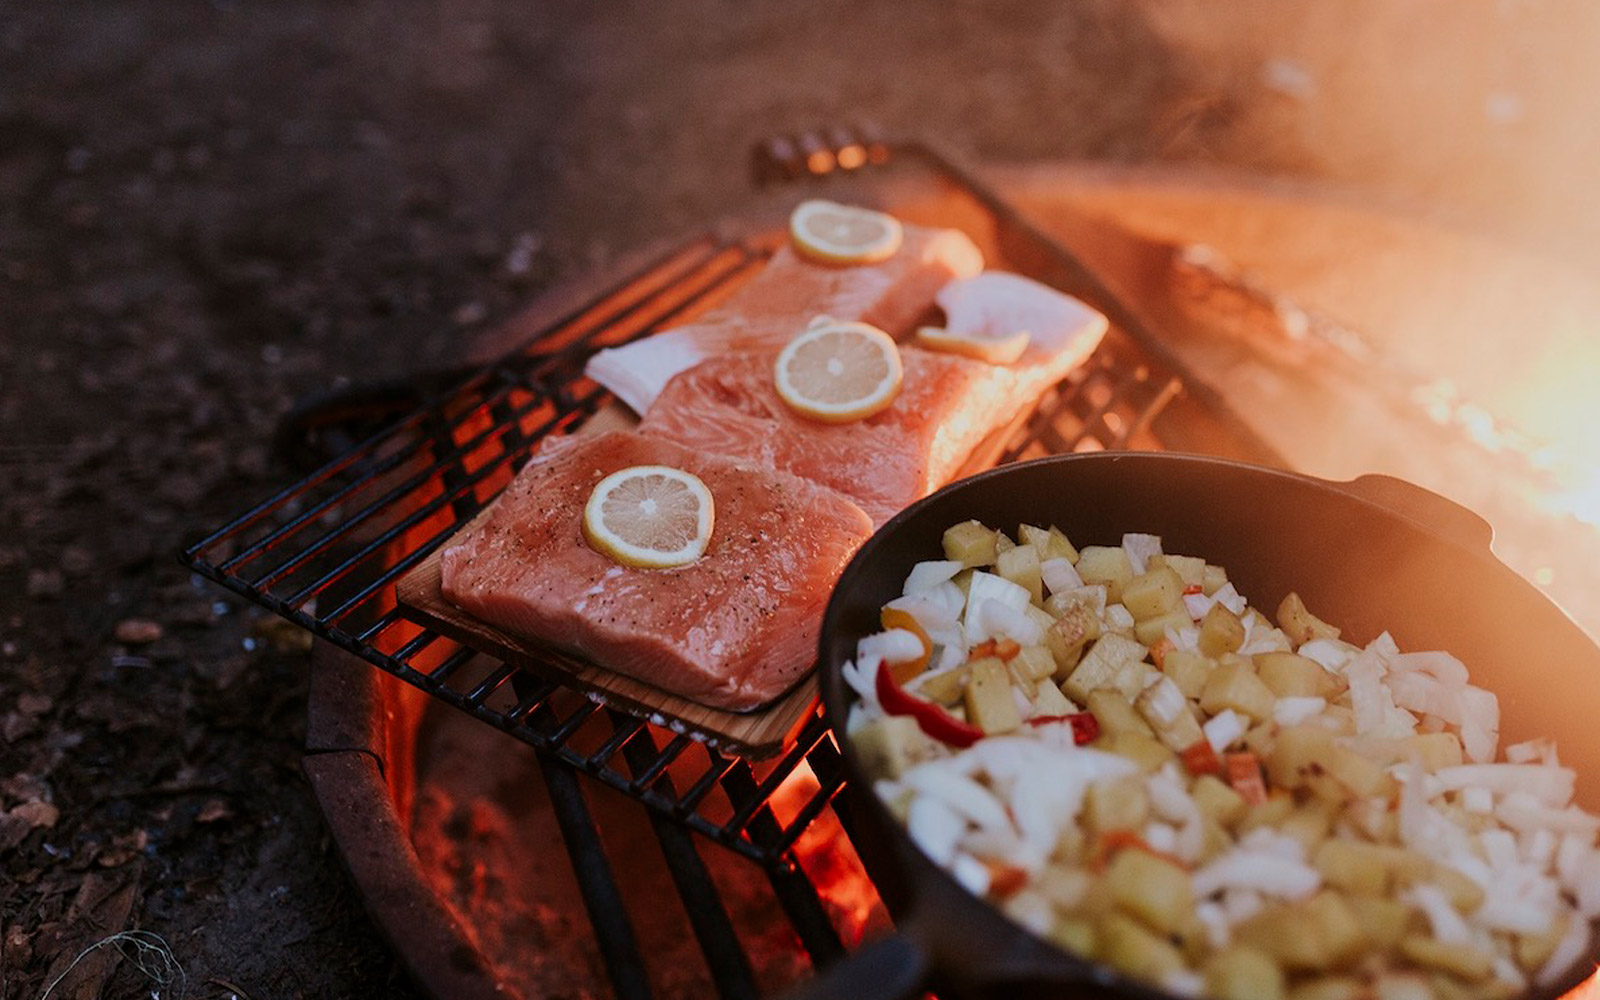 Camp Recipes for an Open Fire - Therm-a-Rest Blog